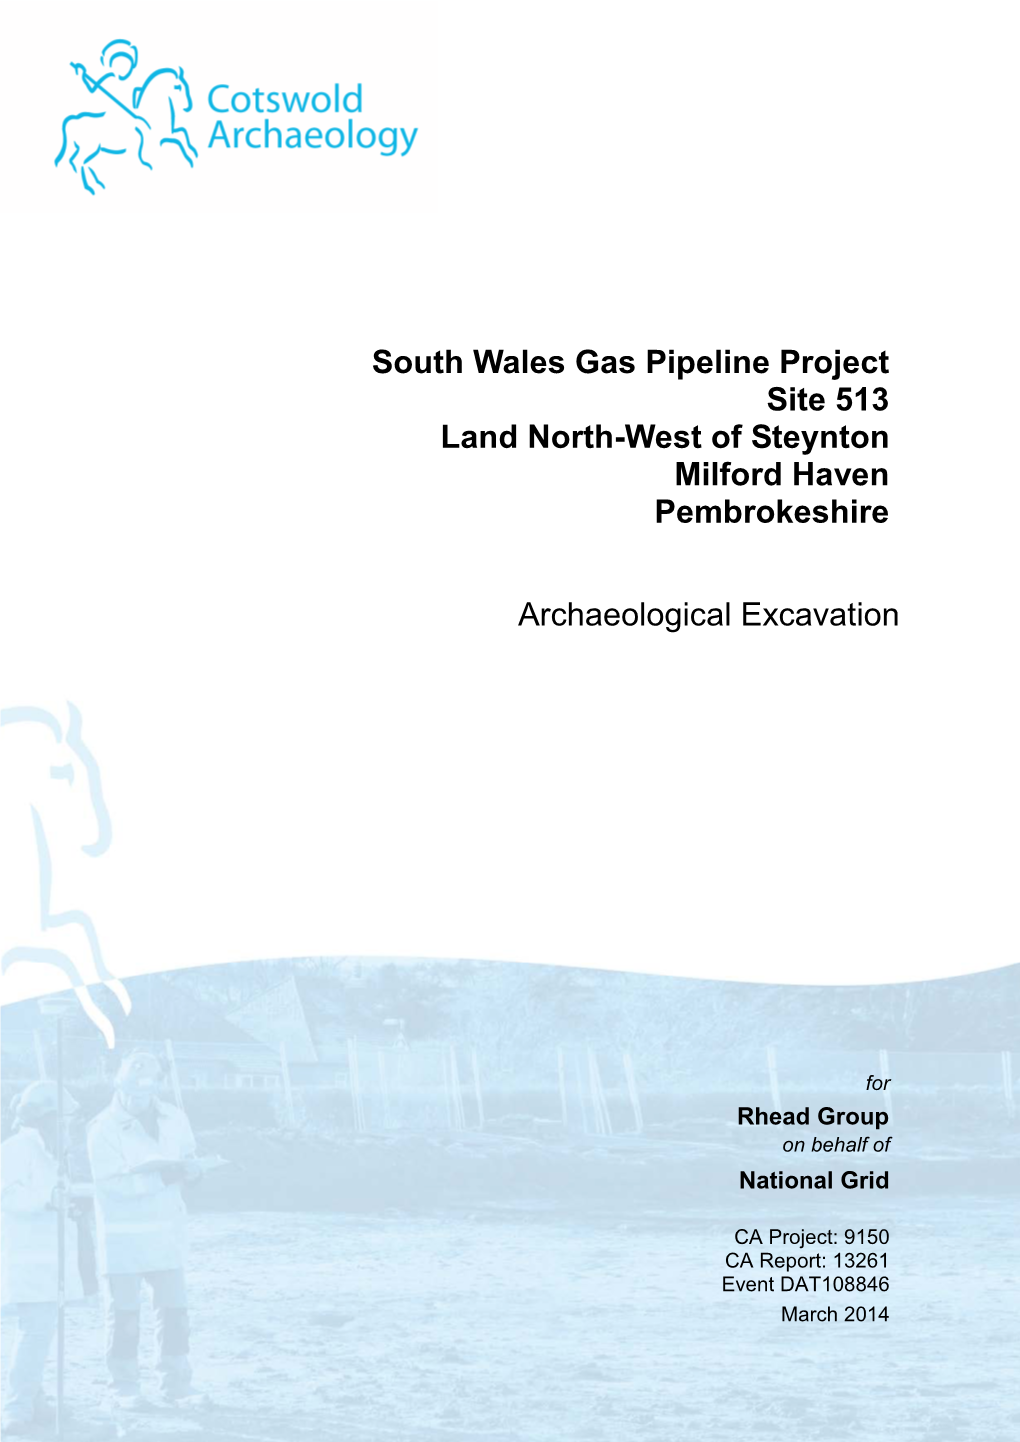 South Wales Gas Pipeline Project Site 513 Land North-West of Steynton Milford Haven Pembrokeshire